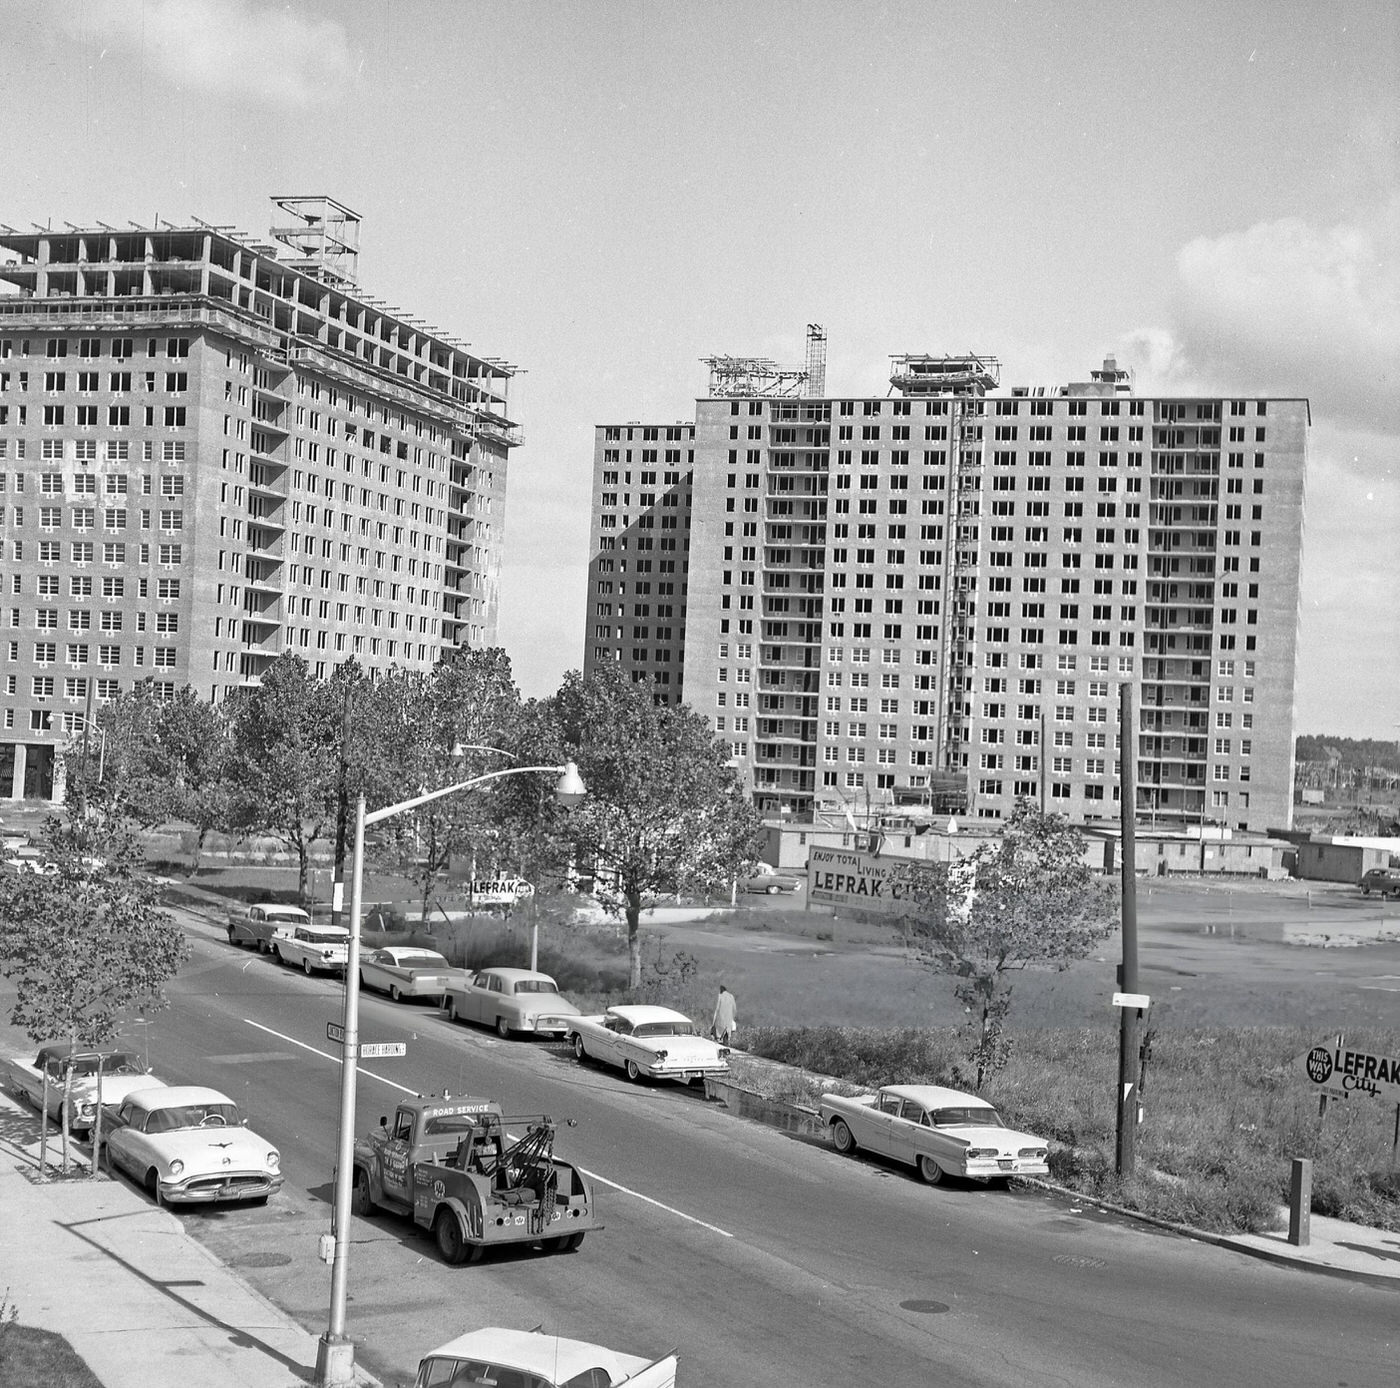 Construction Of The Lefrak City Apartment Complex, As Seen From The Intersection Of Junction Boulevard And The Horace Harding Expressway, Queens, 1960S.